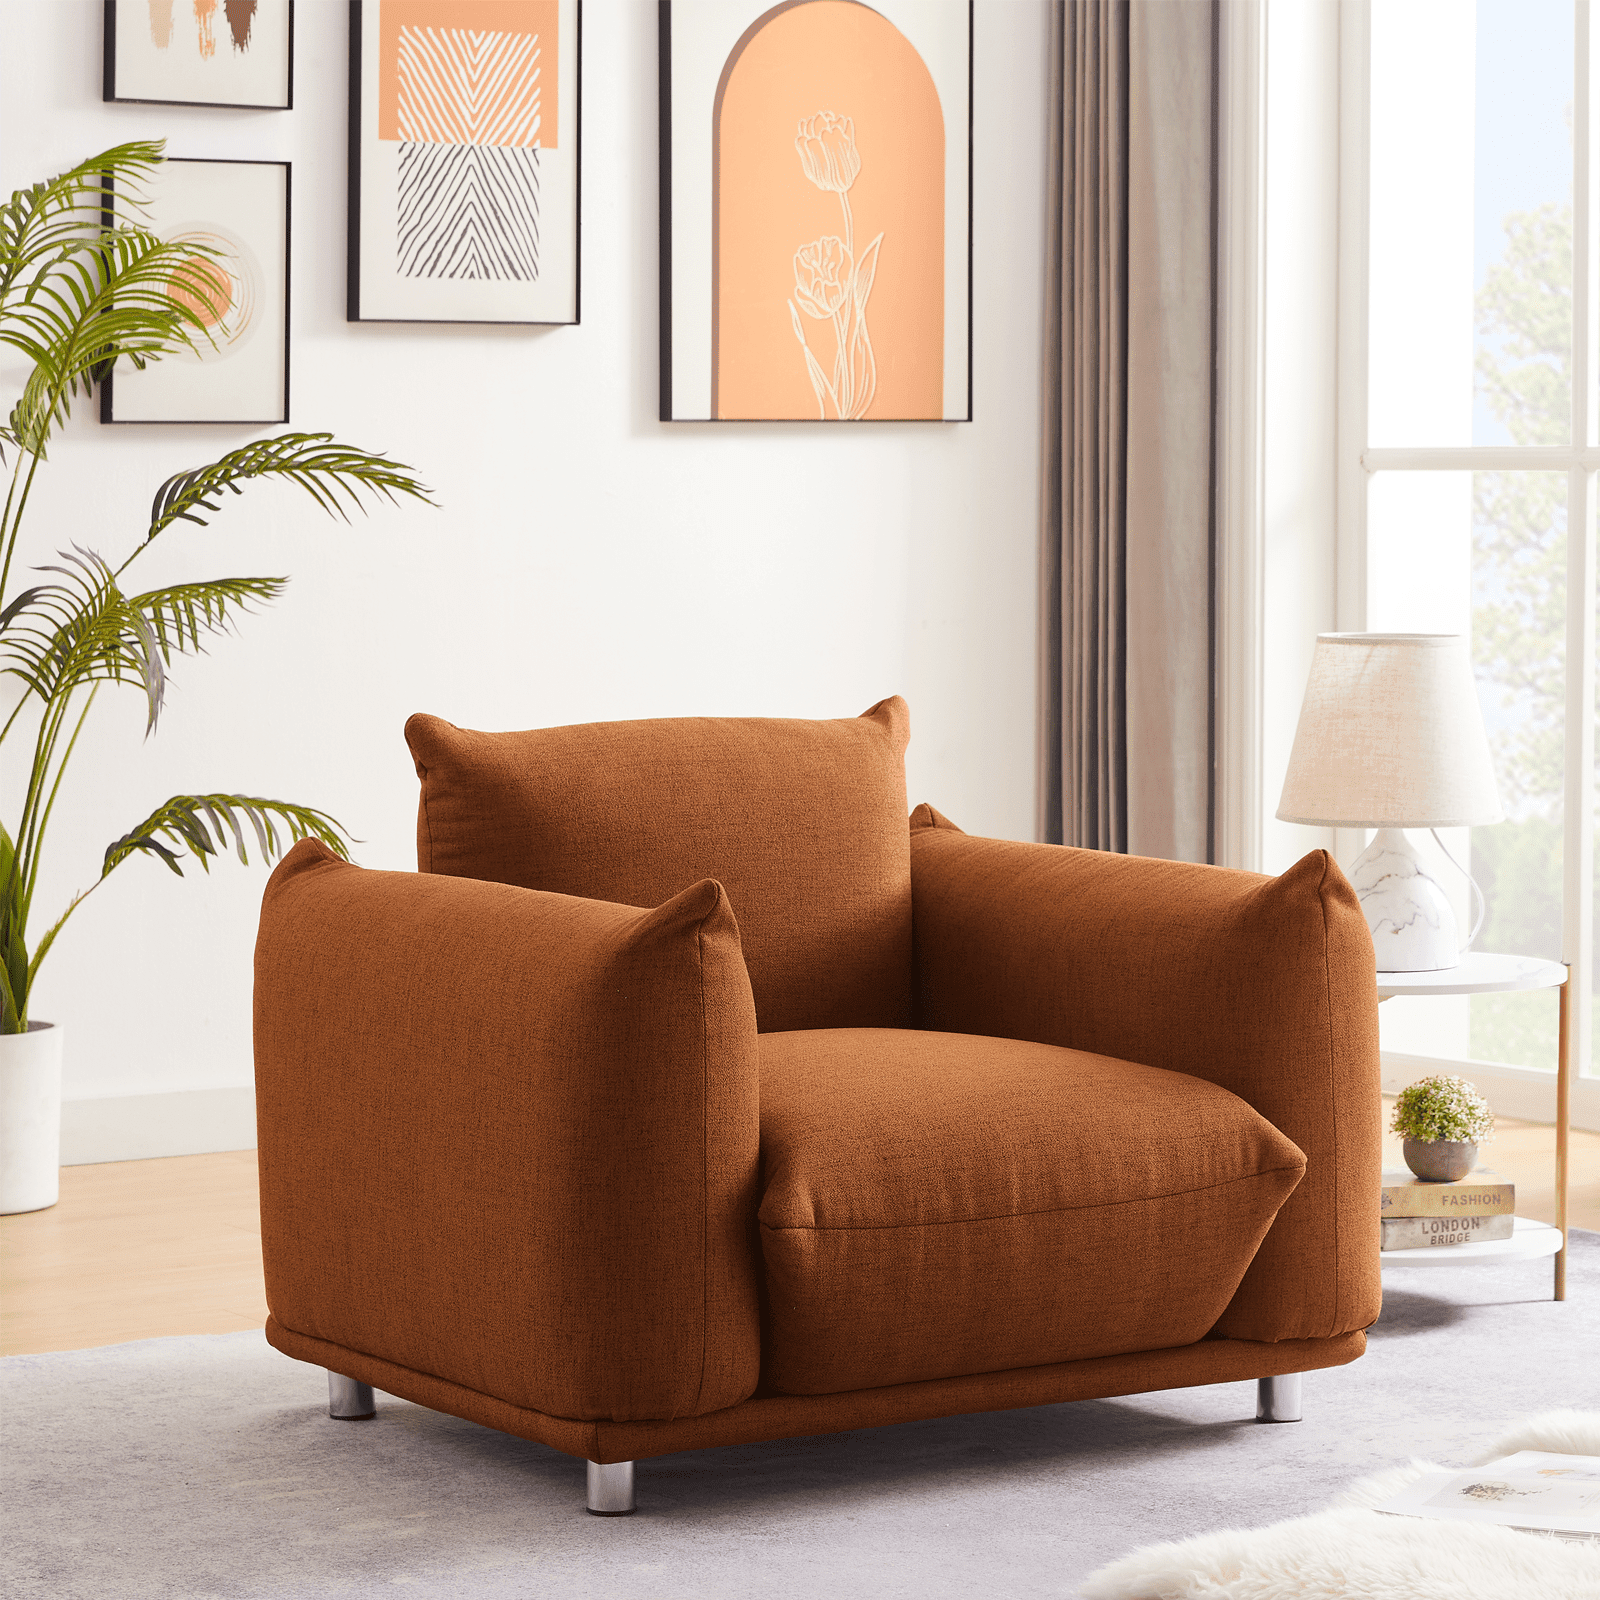 Hison Comfy Oversized Accent Chair for Living Room Brown - Walmart.com